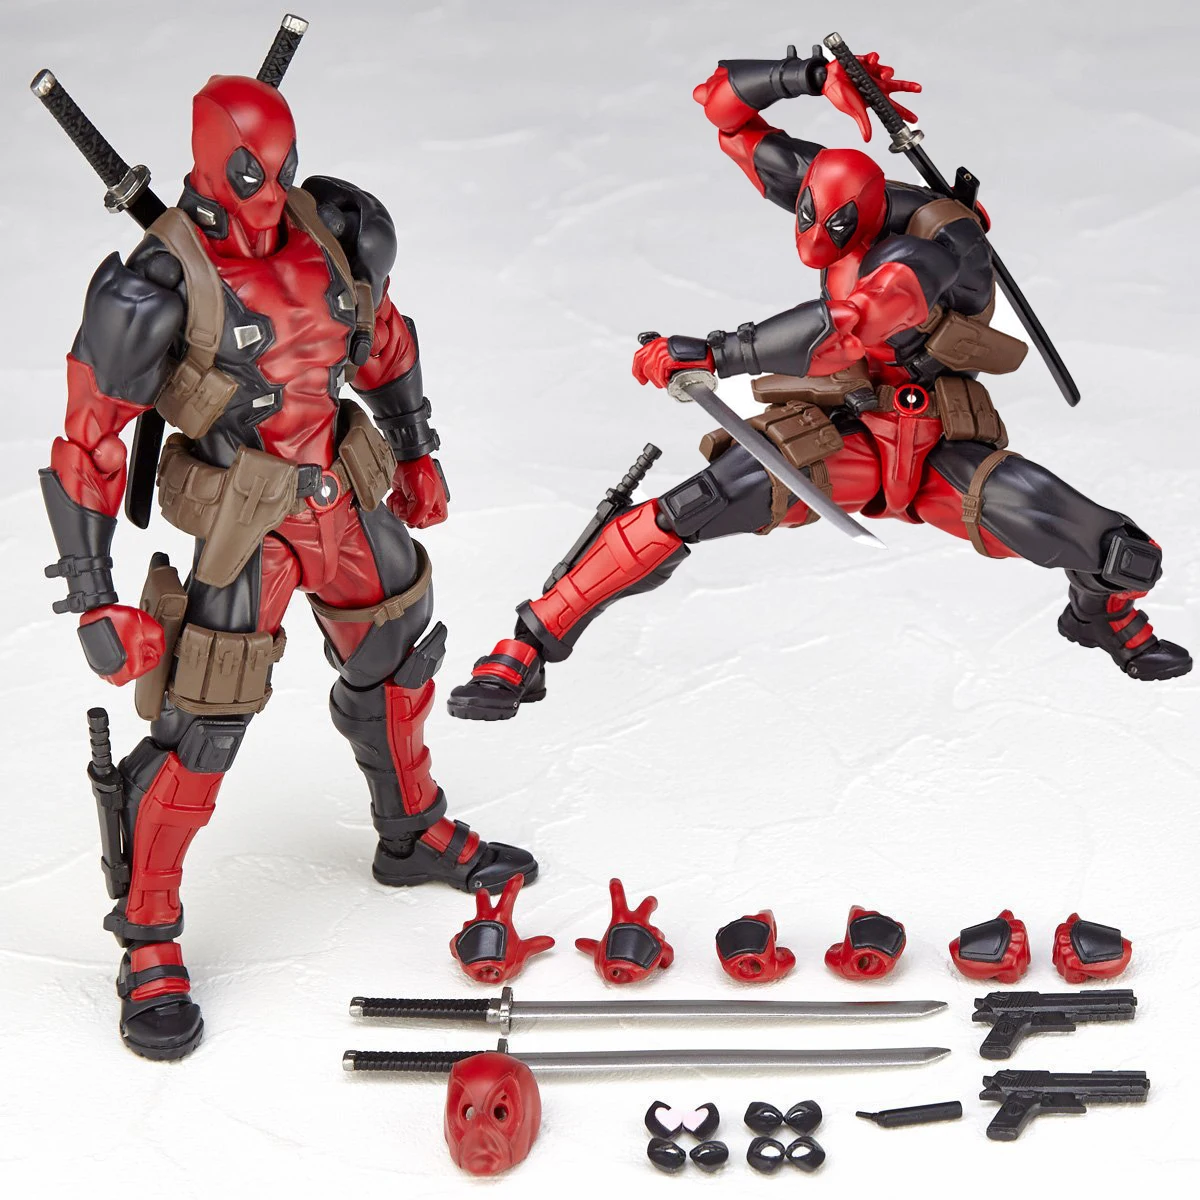 Marvel X men Yamaguchi Deadpool Action Figure Toys Model Variant Movable Joint Dead Pool Statue with